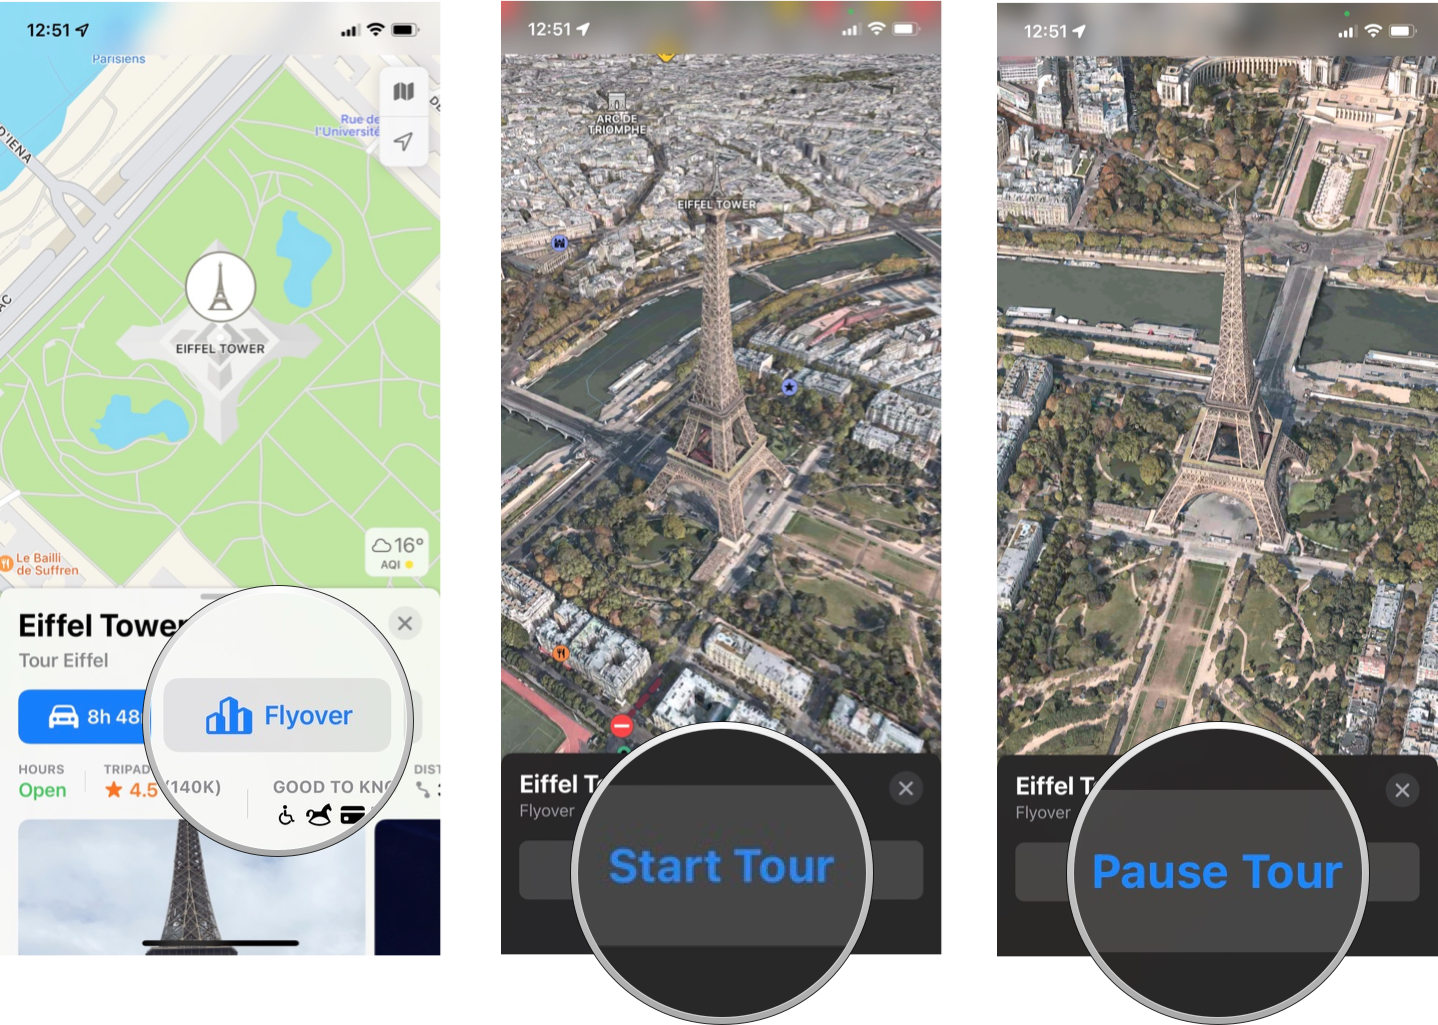 How To Use Flyover: Tap the Flyover button, pan and zoom around the map or tap Start Tour to begin an aerial 3D tour, tap Pause Tour to go back to manual exploration